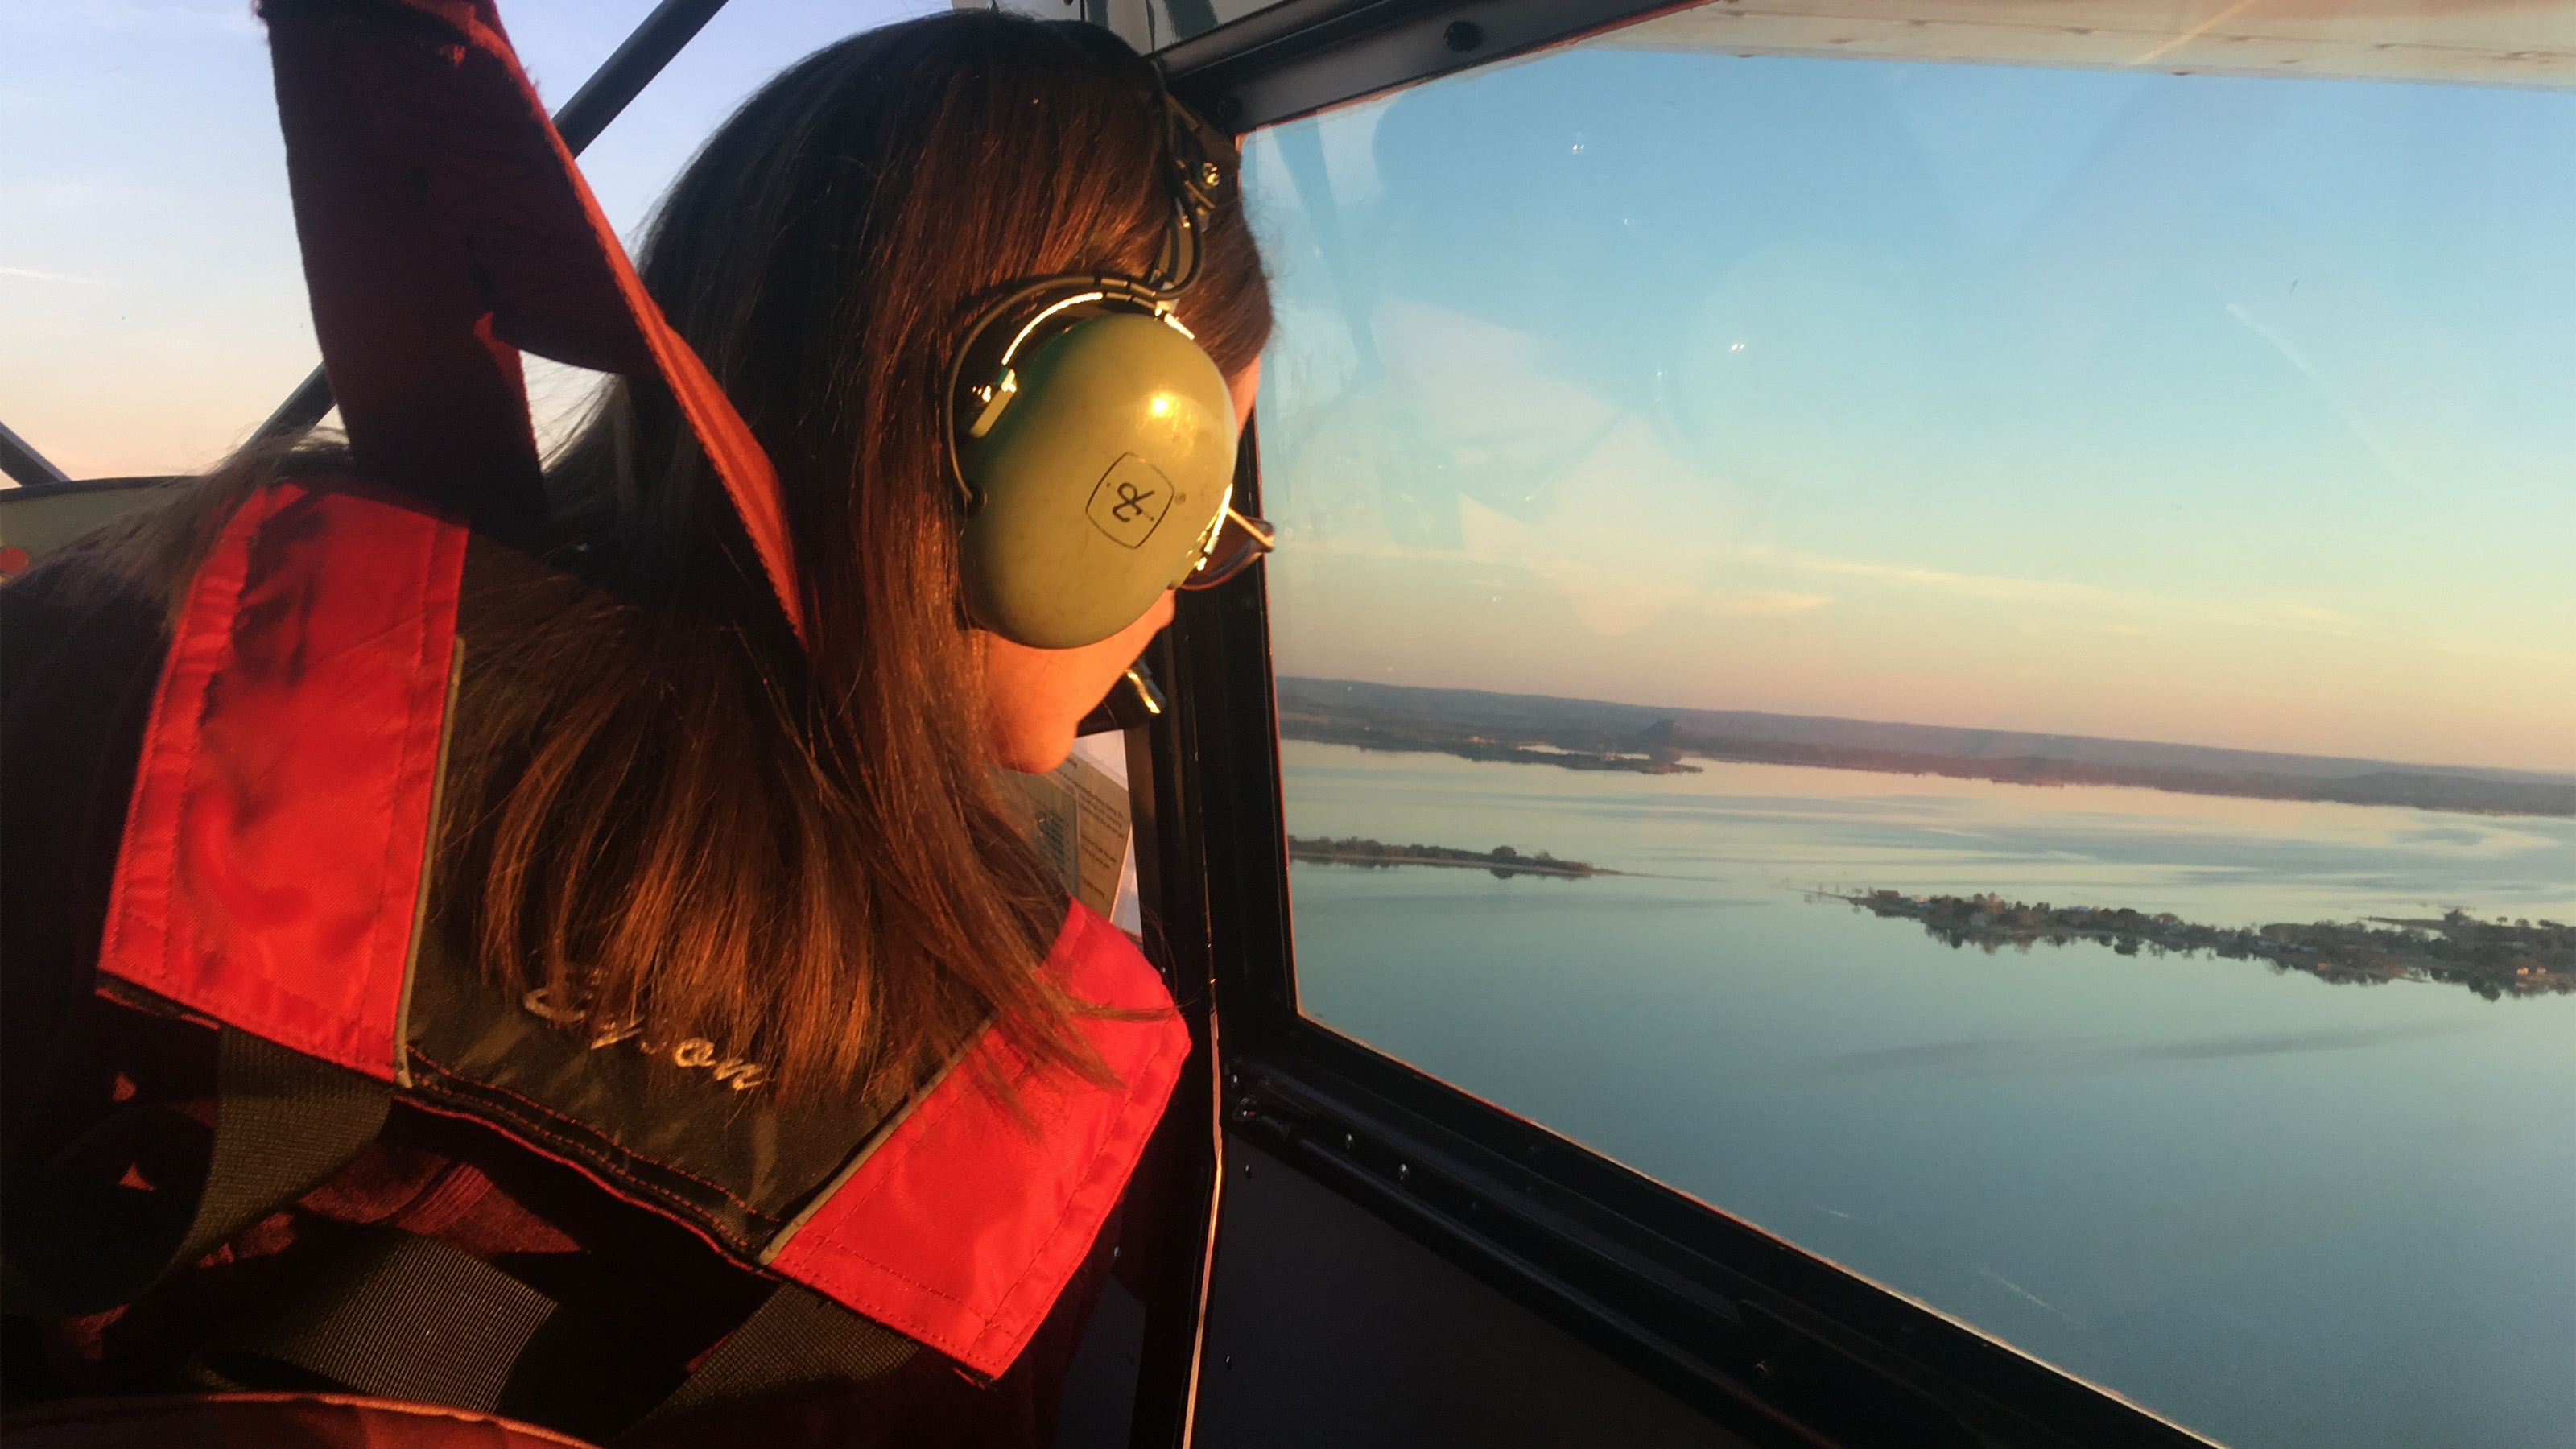 Alyssa Cobb flies over Lake Buchanan before sunset after a full day of seaplane training. What a beautiful way to end the day before docking at Canyon of the Eagles Resort! Photo by Tres Clinton.